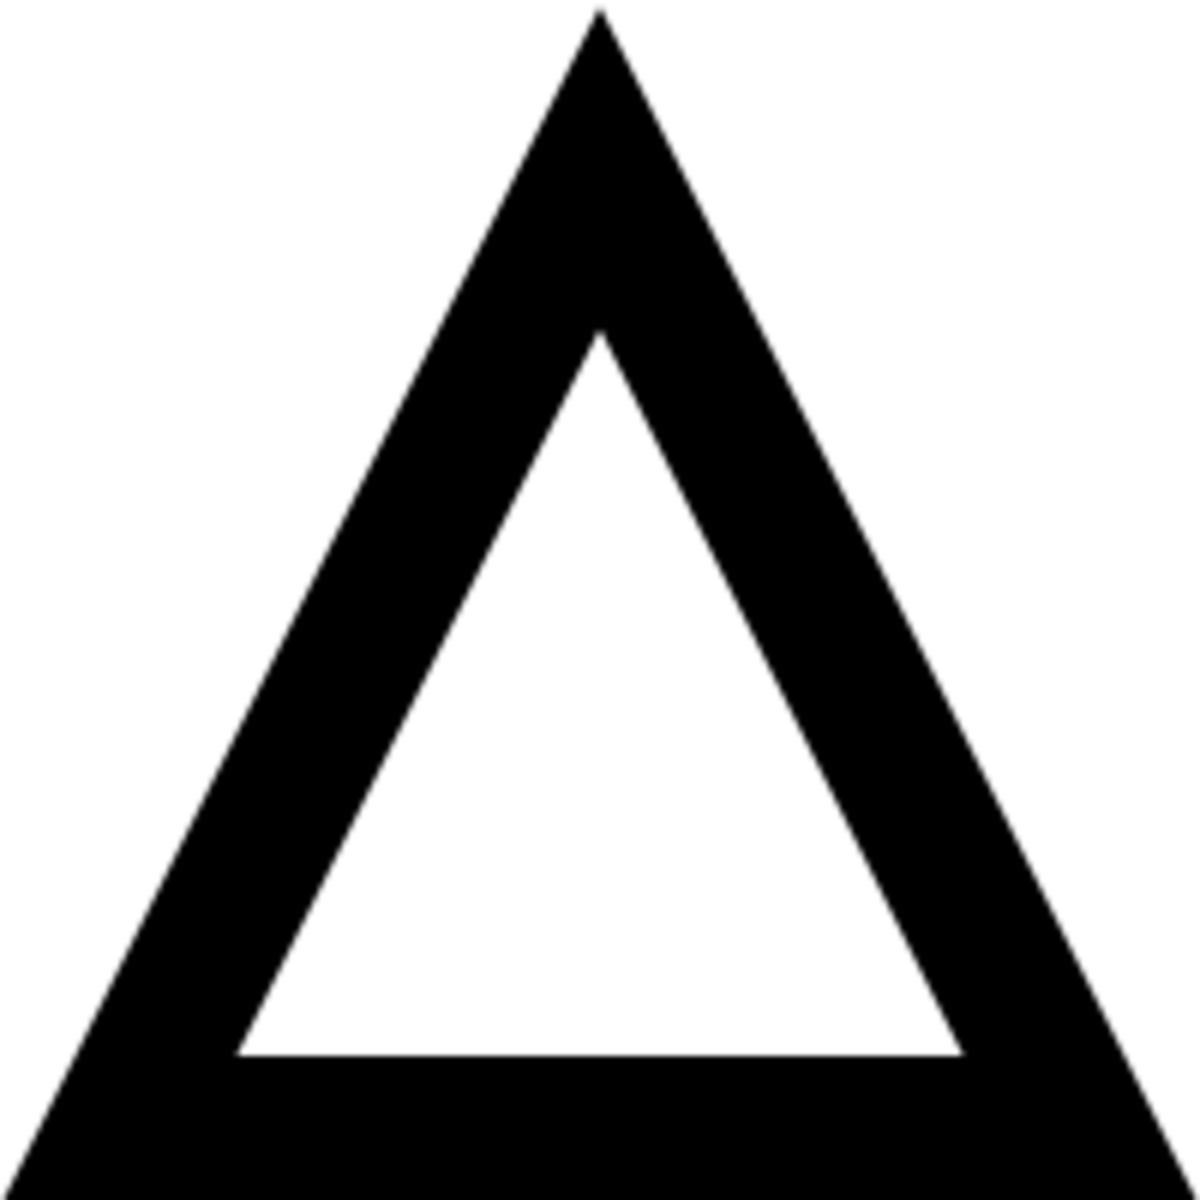 This is the symbol indicating a trine.